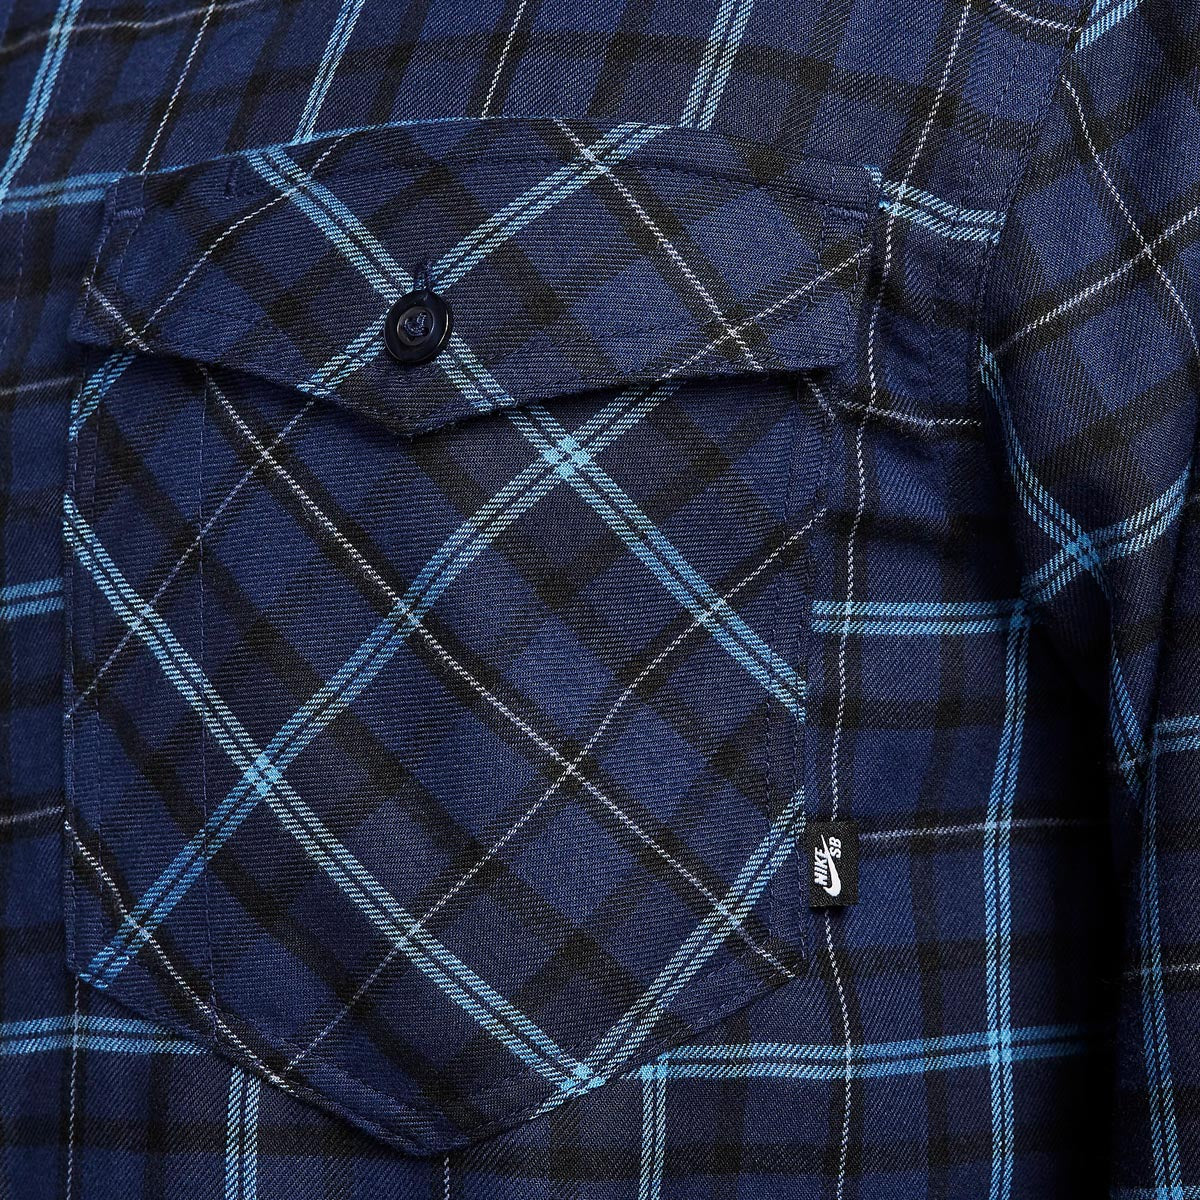 Nike SB Flannel Skate Button Up Shirt - Midnight Navy/Obsidian image 3